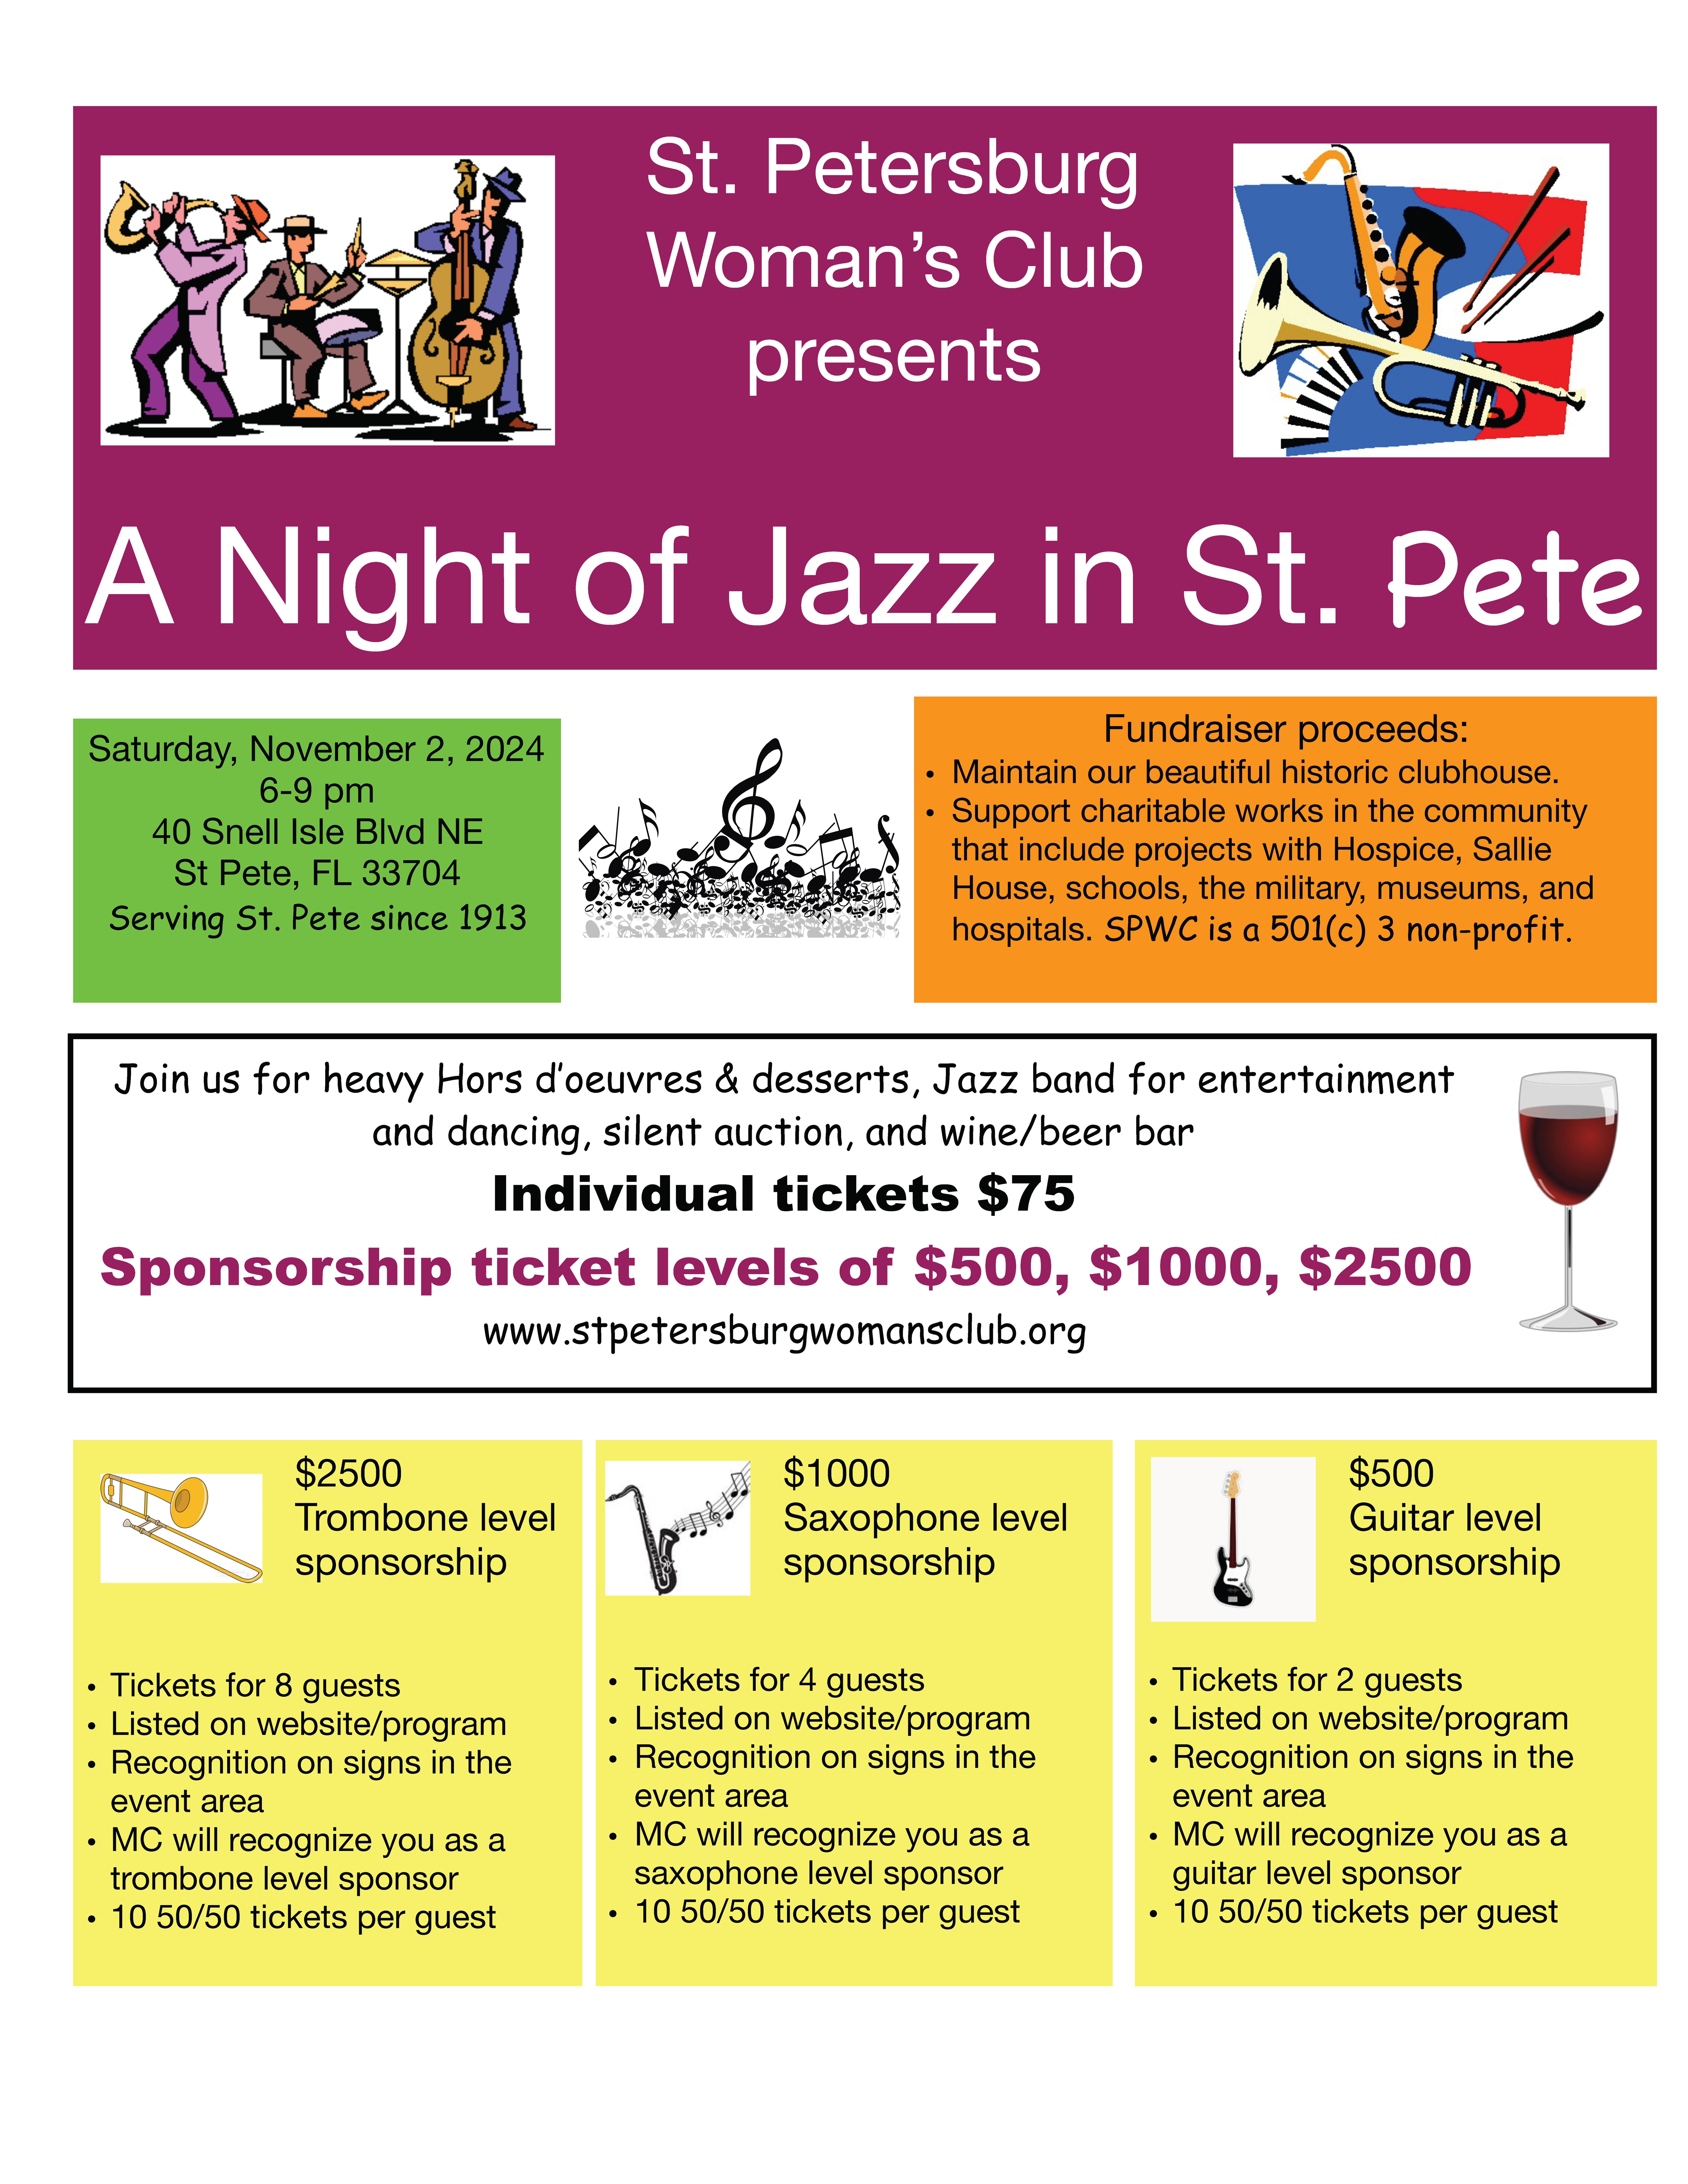 St. Petersburg Woman's Club Fundraiser: A Night of Jazz in St. Pete. Saturday, November 2, 2024 6-9 pm at The St. Petersburg Woman's Club, 40 Snell Isle Blvd NE, St Petersburg, FL 33704